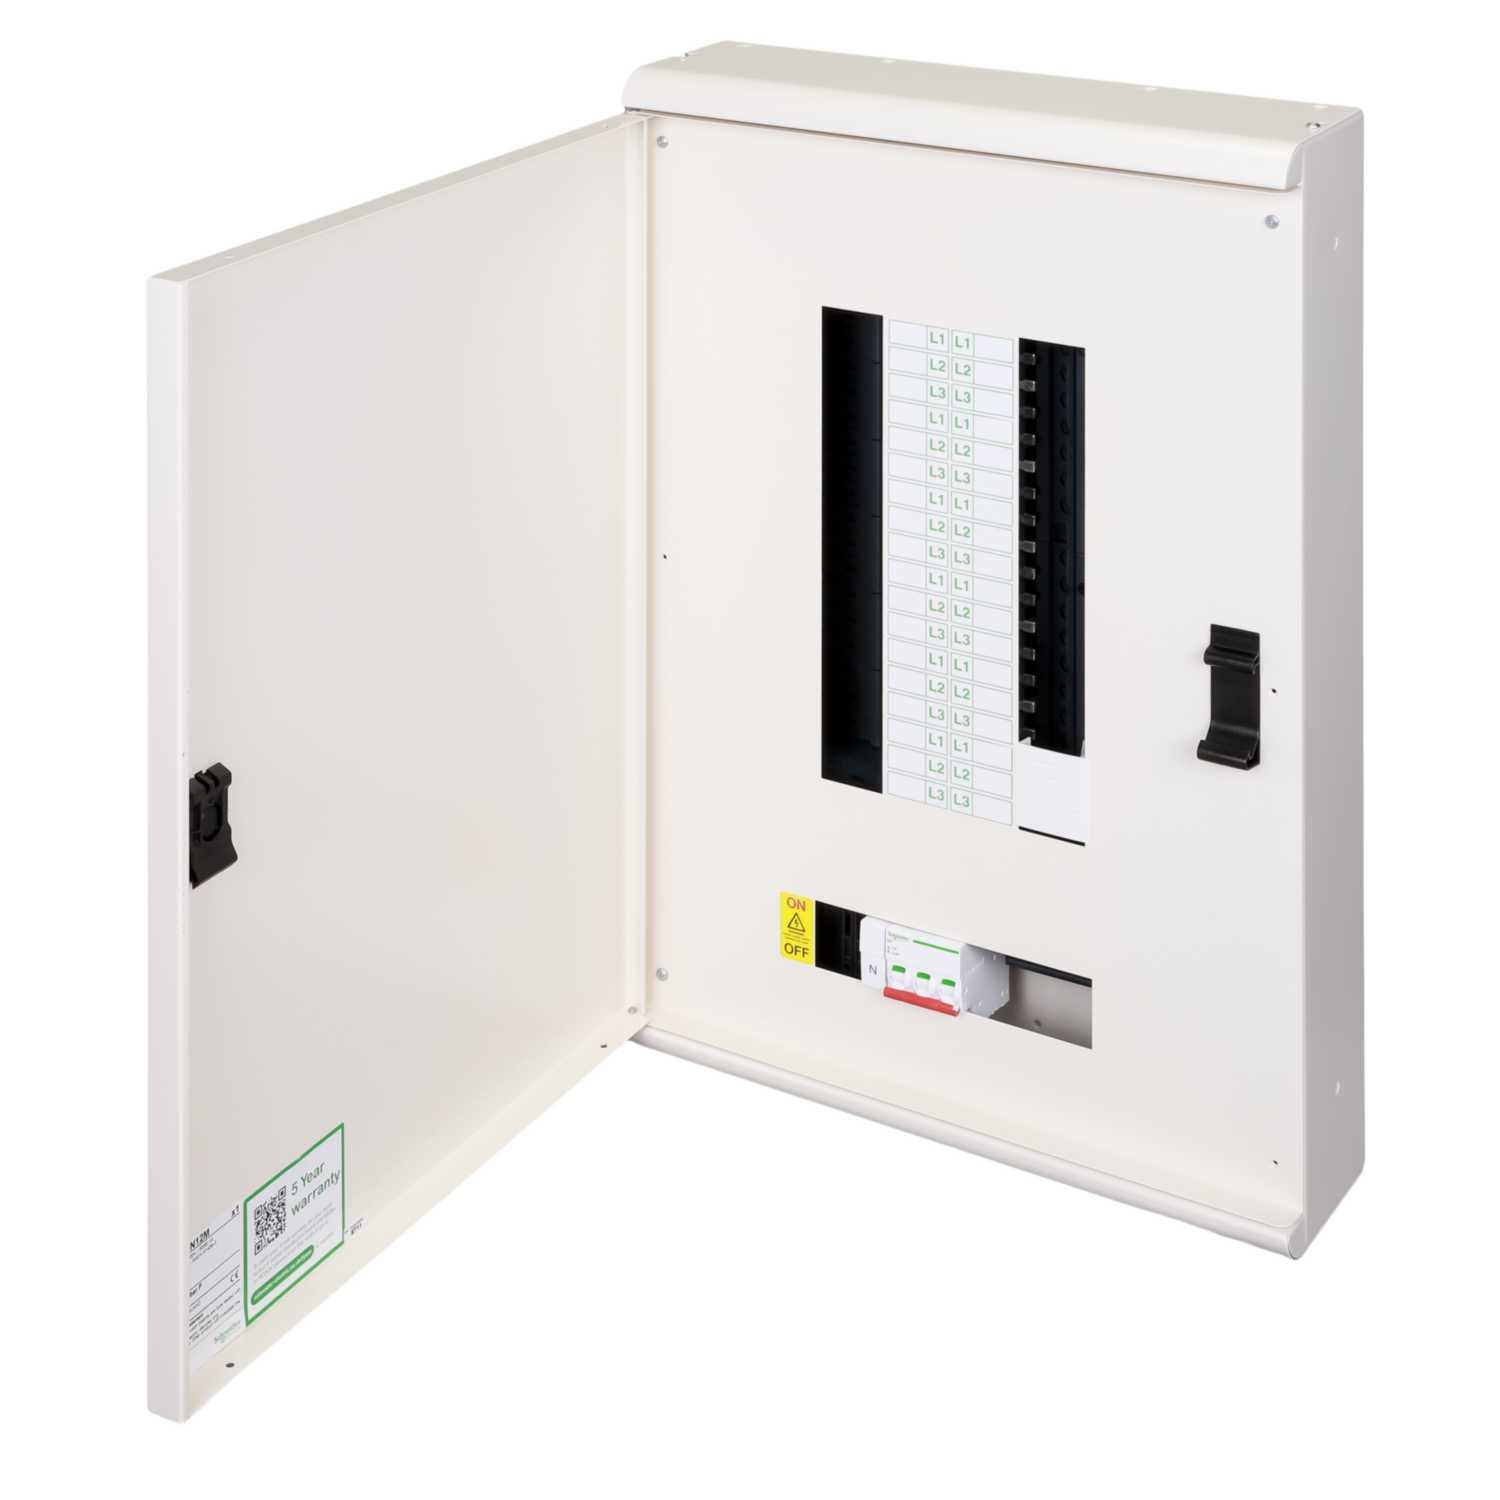 RR Three Phase & Neutral Distribution Board - Reliable Electrical Distribution at Supply Master Electrical Accessories Buy Tools hardware Building materials